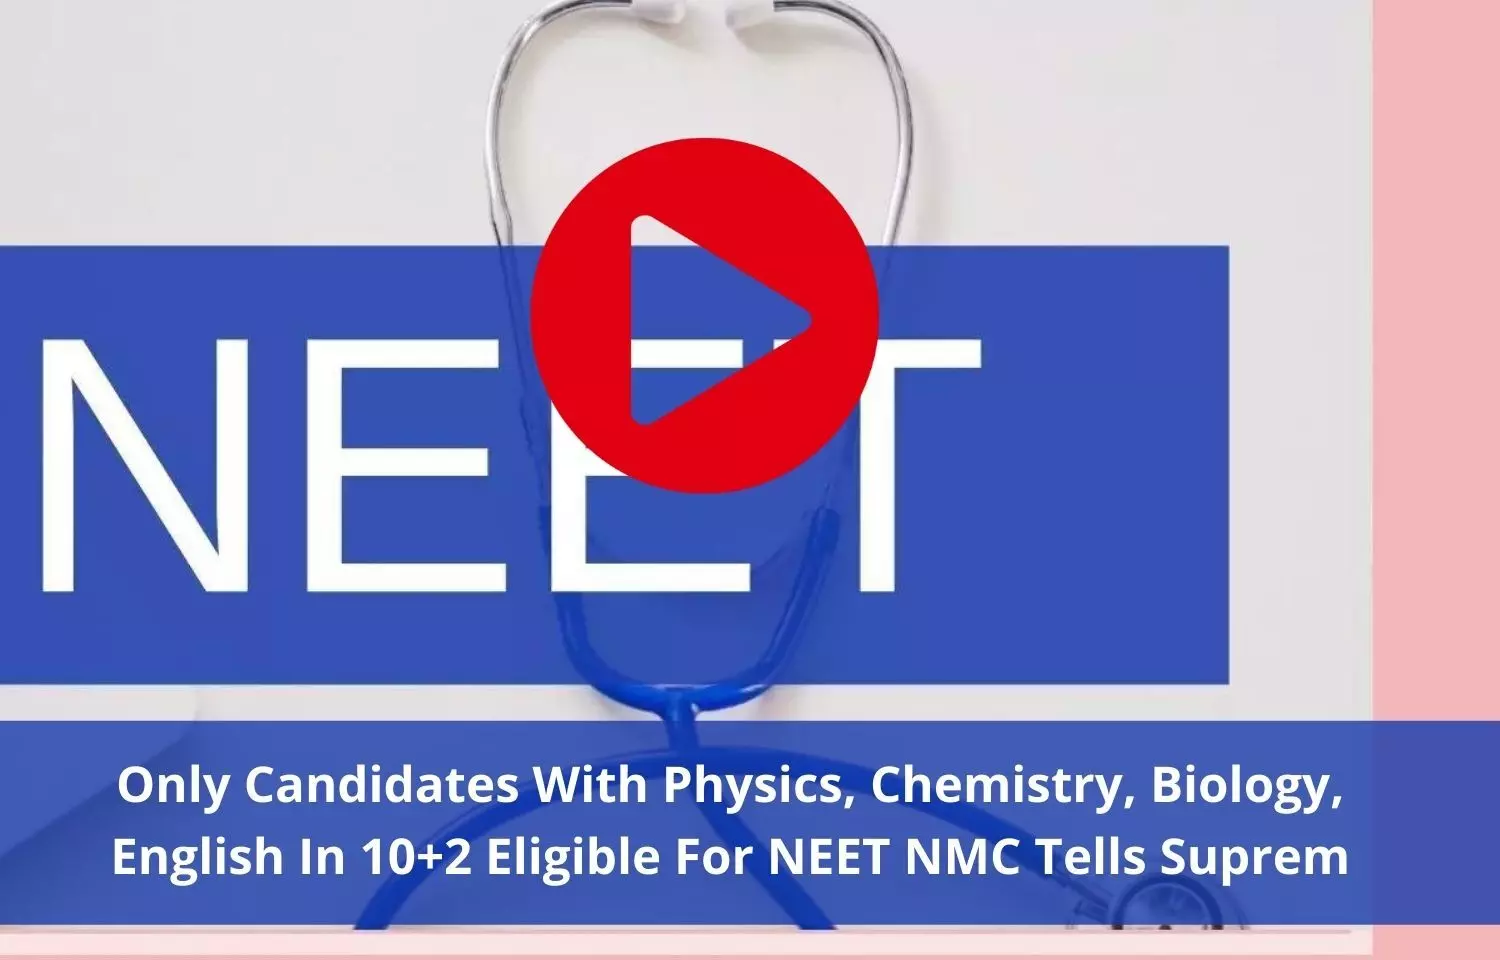 Students must complete 10 +2 with PCB, English to be eligible for NEET: NMC